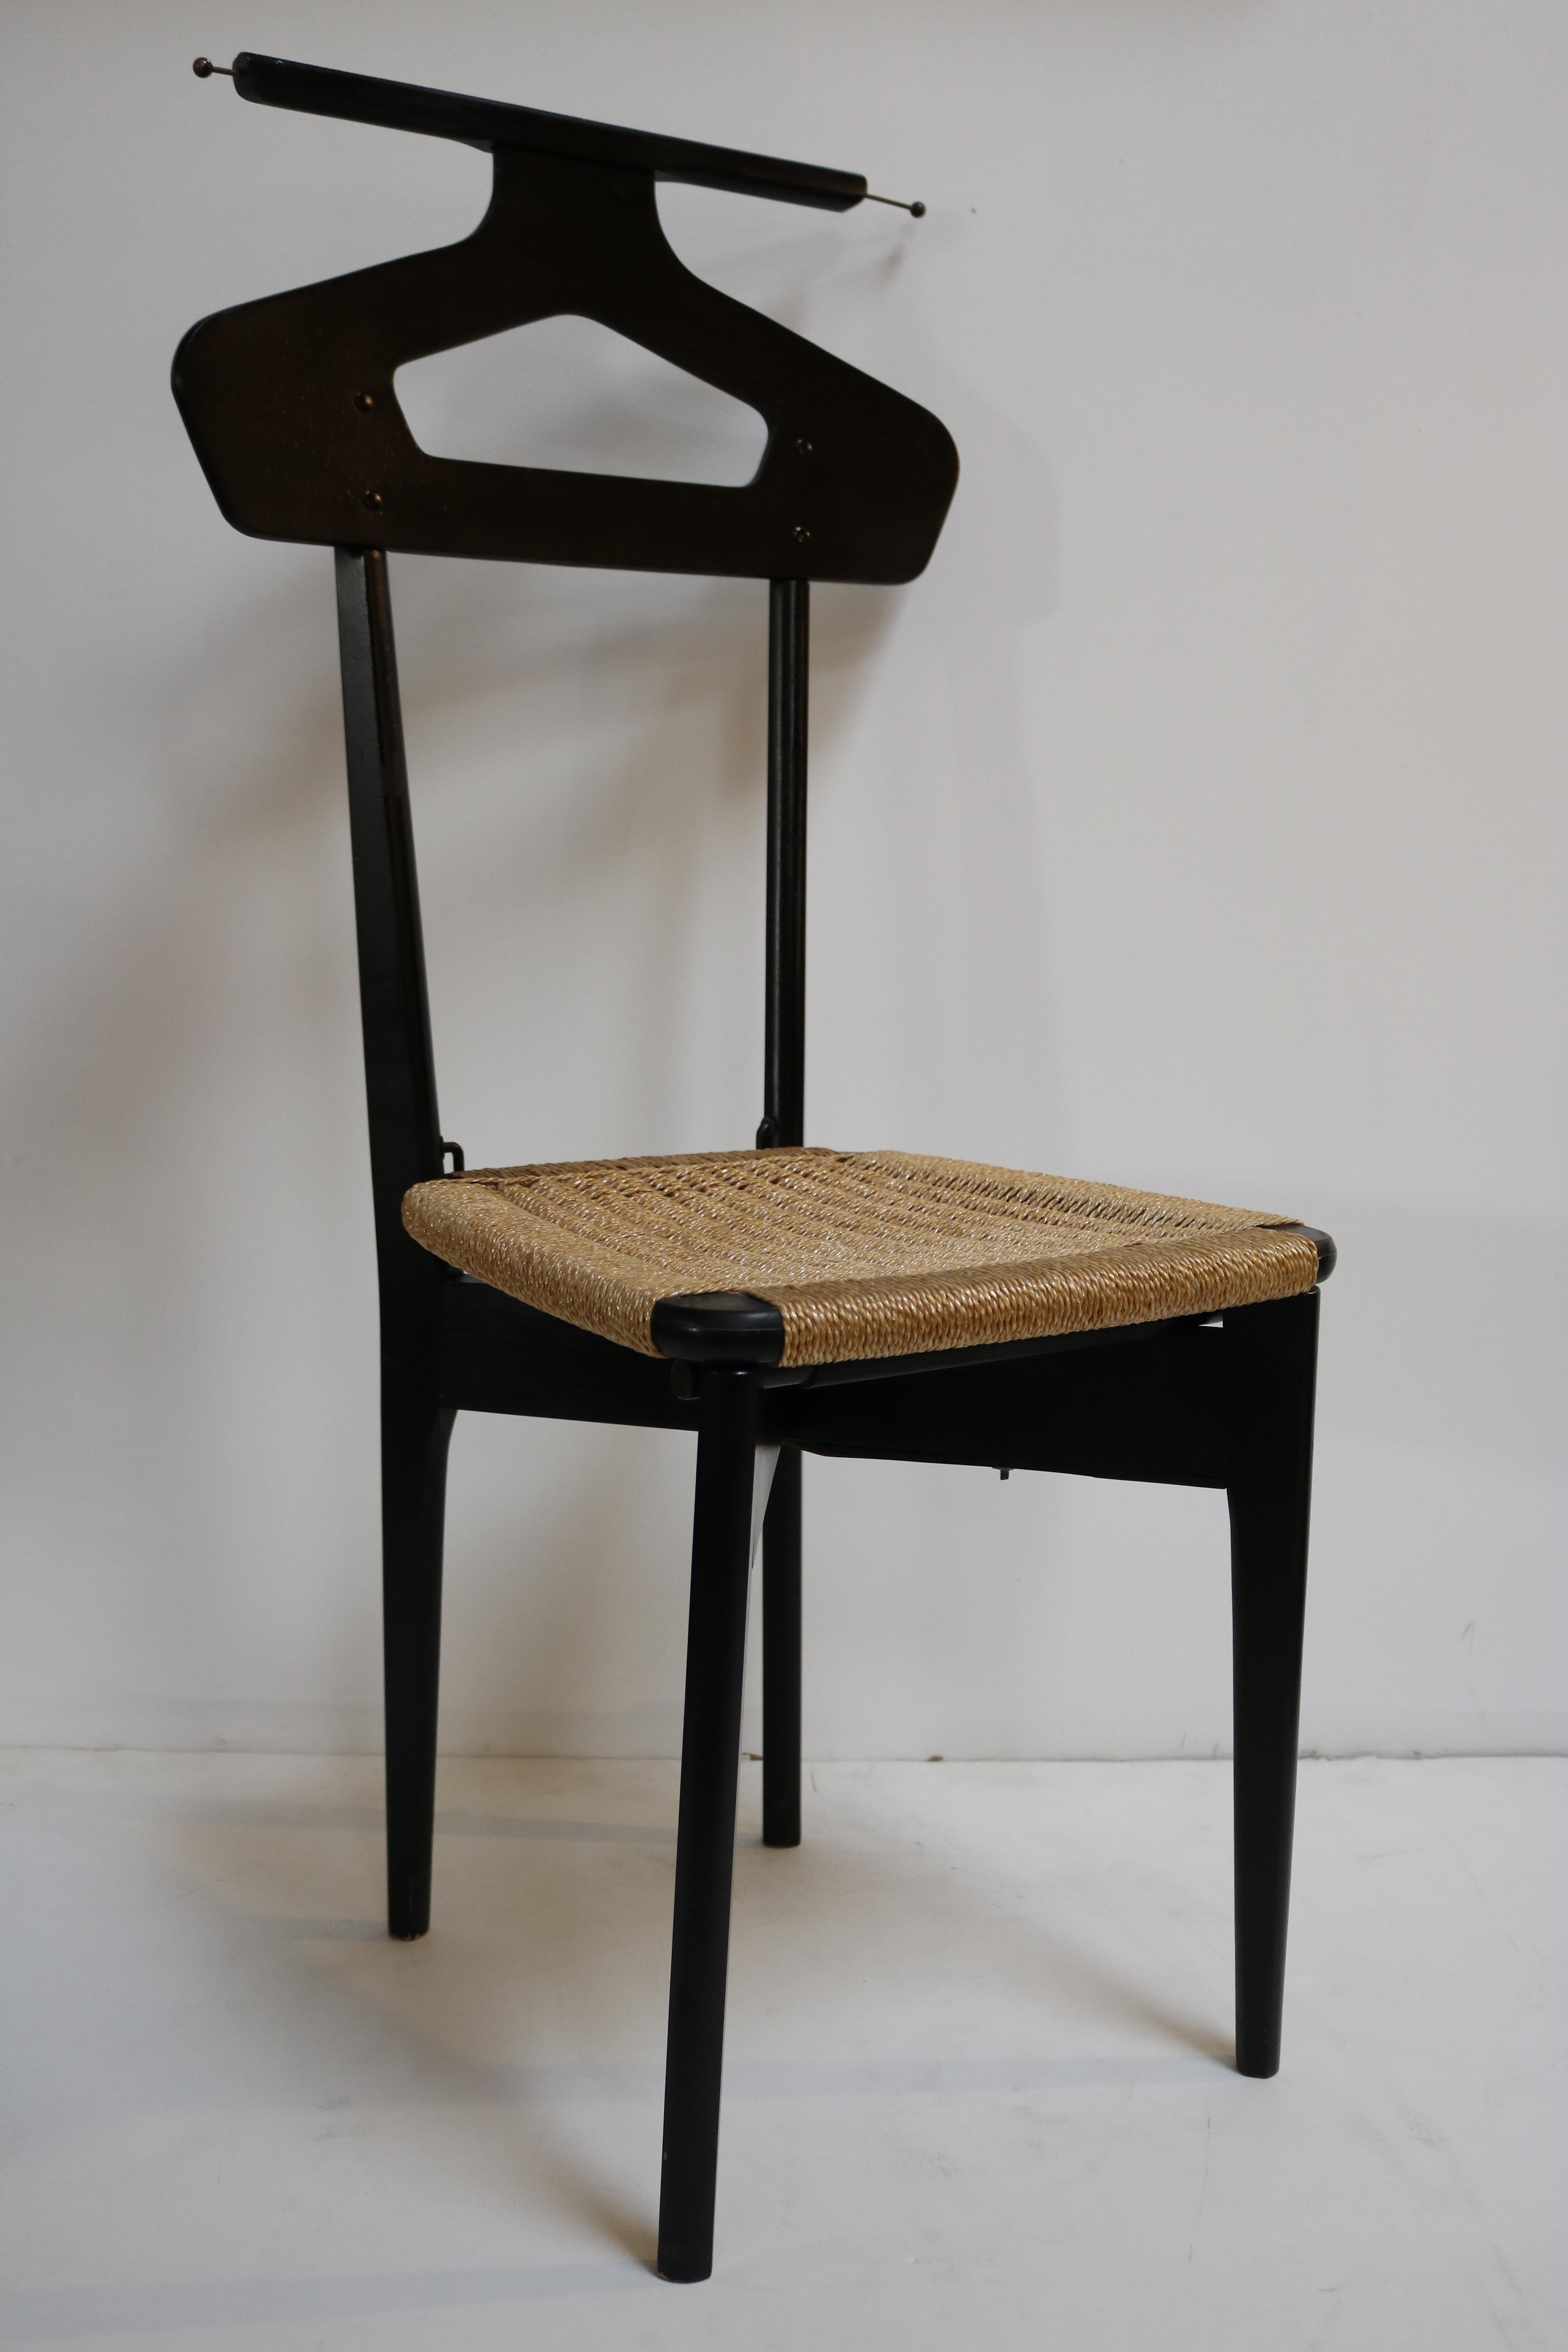 This valet is of black stained wood.
The seat and the top are covered with cane.
On each side of the top, there is a brass retractable rod to hang your tie, belt or scarf.
If you lift the seat open, you'll find a secret compartment where you can